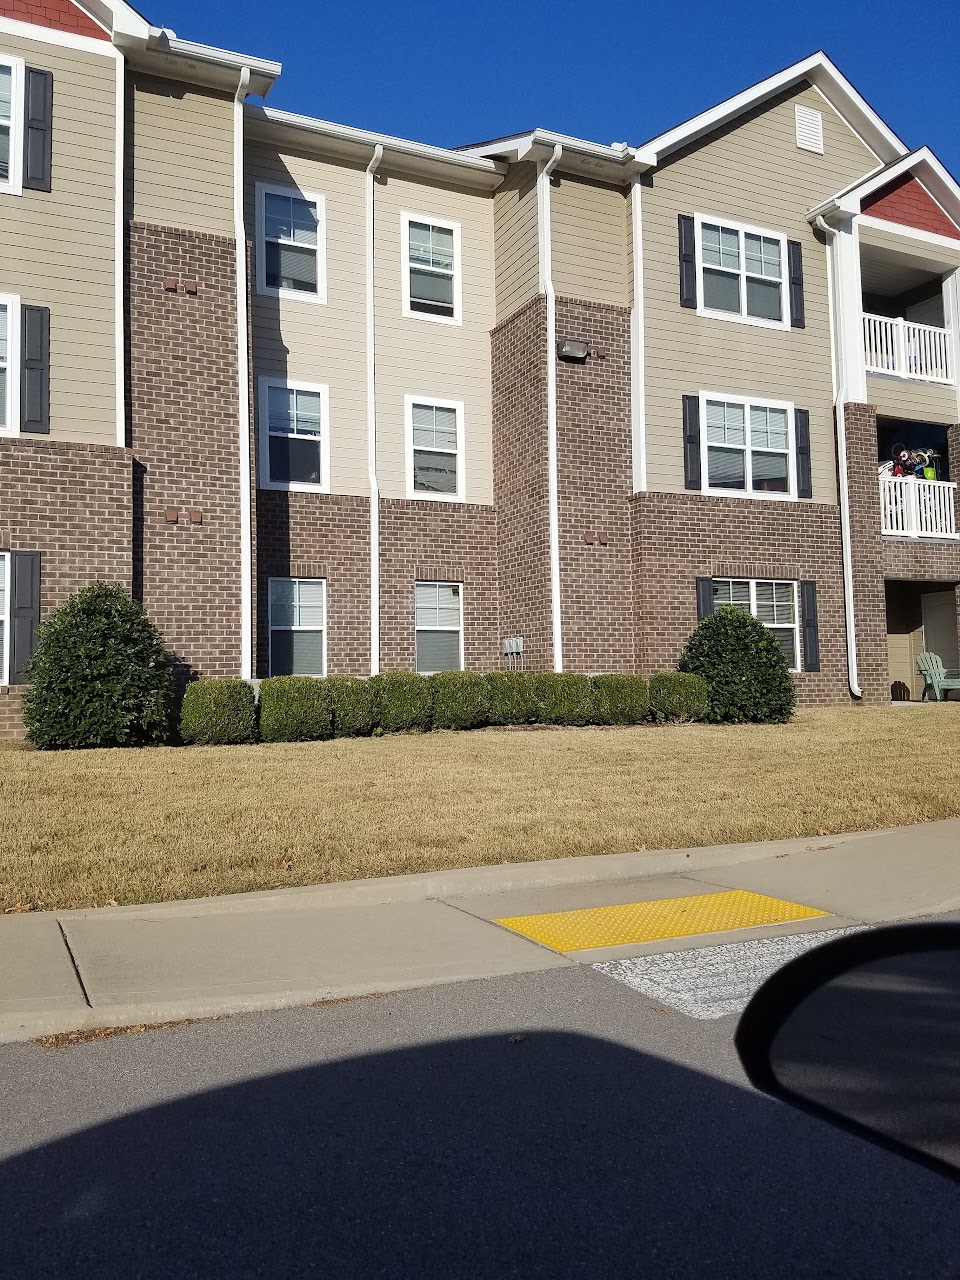 Photo of OCTOBER HOMES. Affordable housing located at 606 N DUPONT AVE MADISON, TN 37115